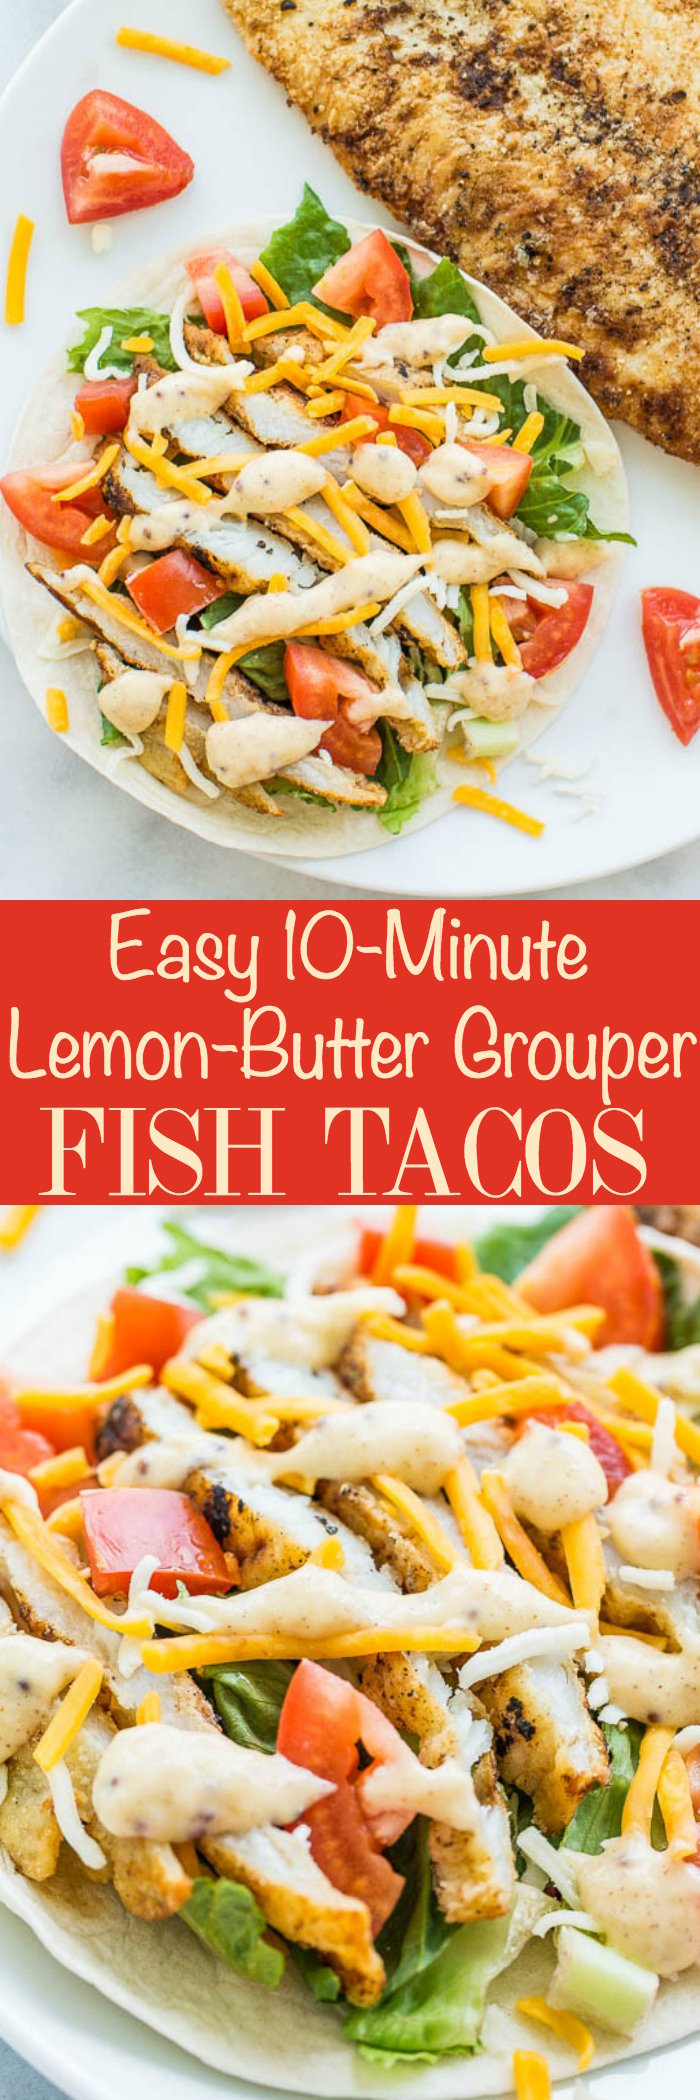 Easy 10-Minute Lemon-Butter Grouper Fish Tacos - Fast, fresh, and healthy! An easy fish taco recipe everyone loves! Lemony, buttery fish with a honey mustard-lemon sauce on top! Perfect for busy nights because they're so quick!!